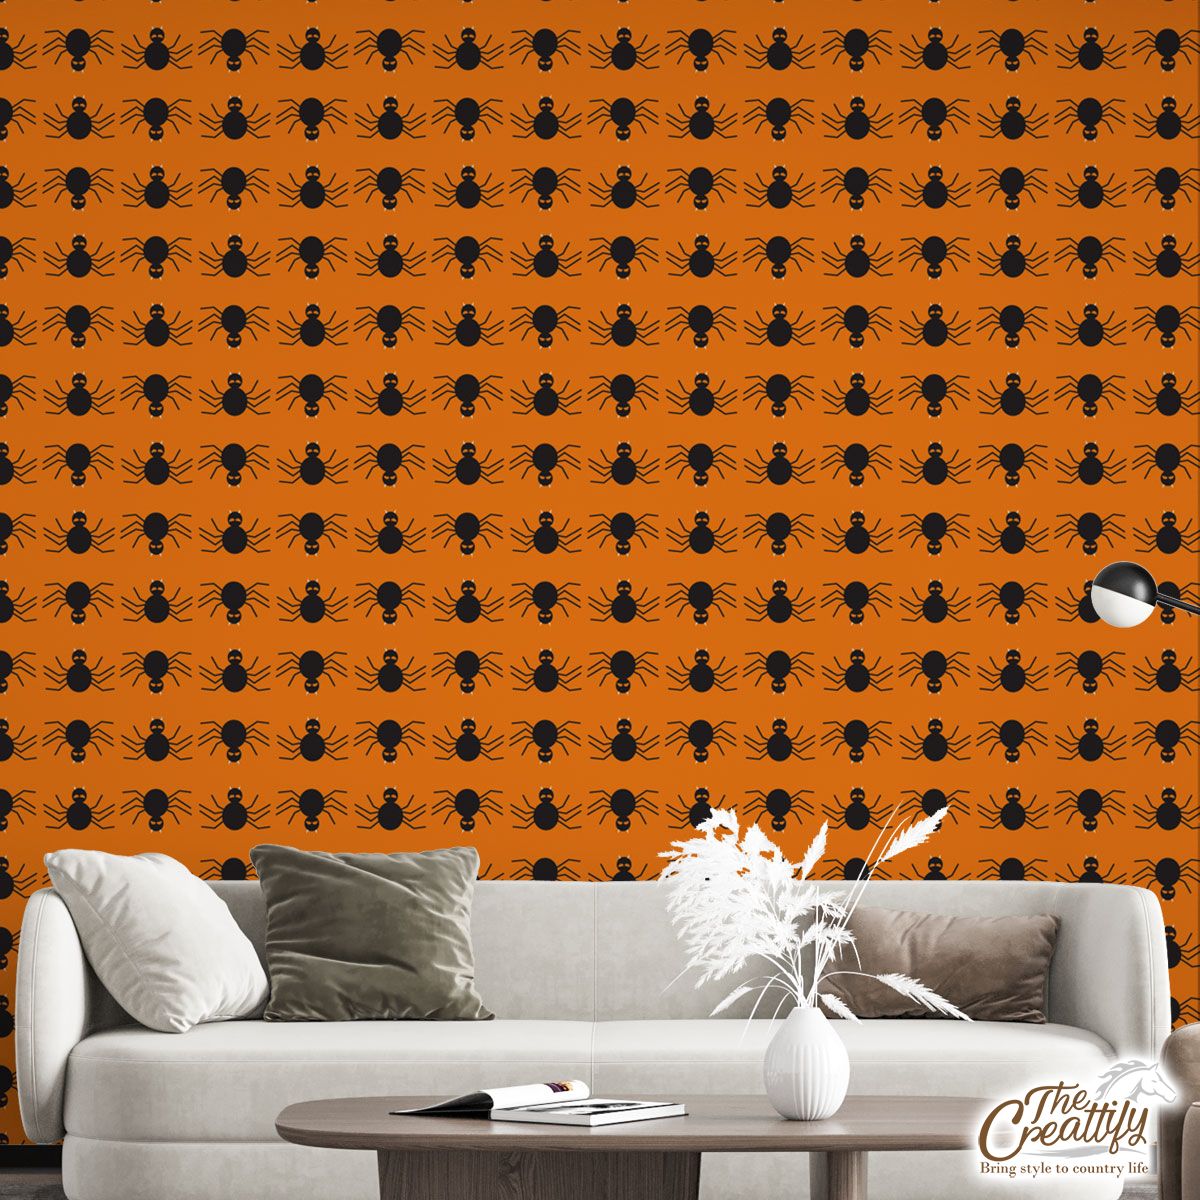 Black Spider On Halloween Background Wall Mural